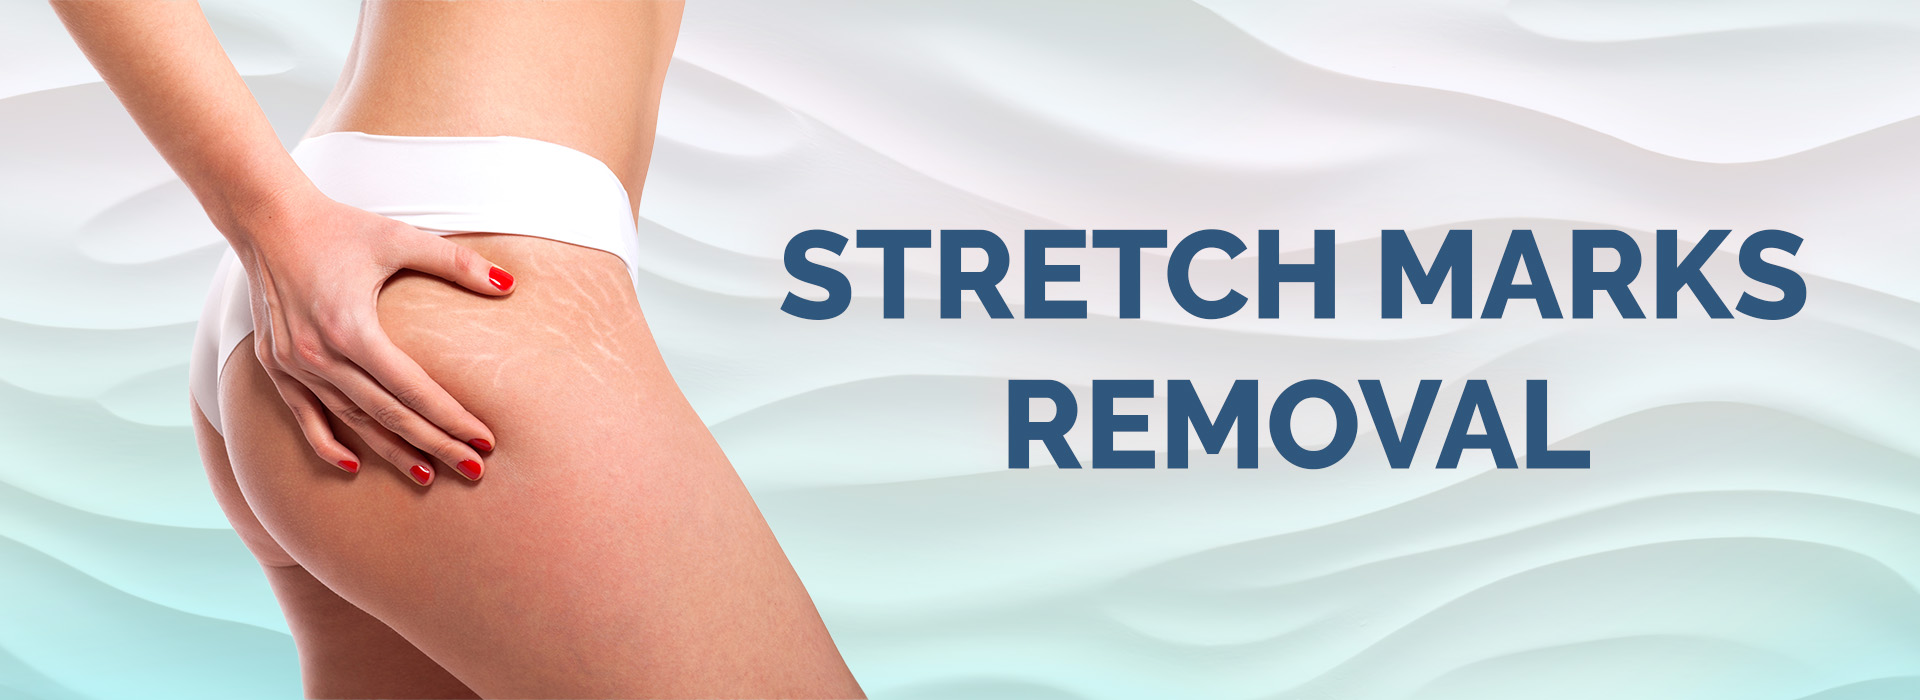 Stretch Mark Removal Treatment Toronto Banner